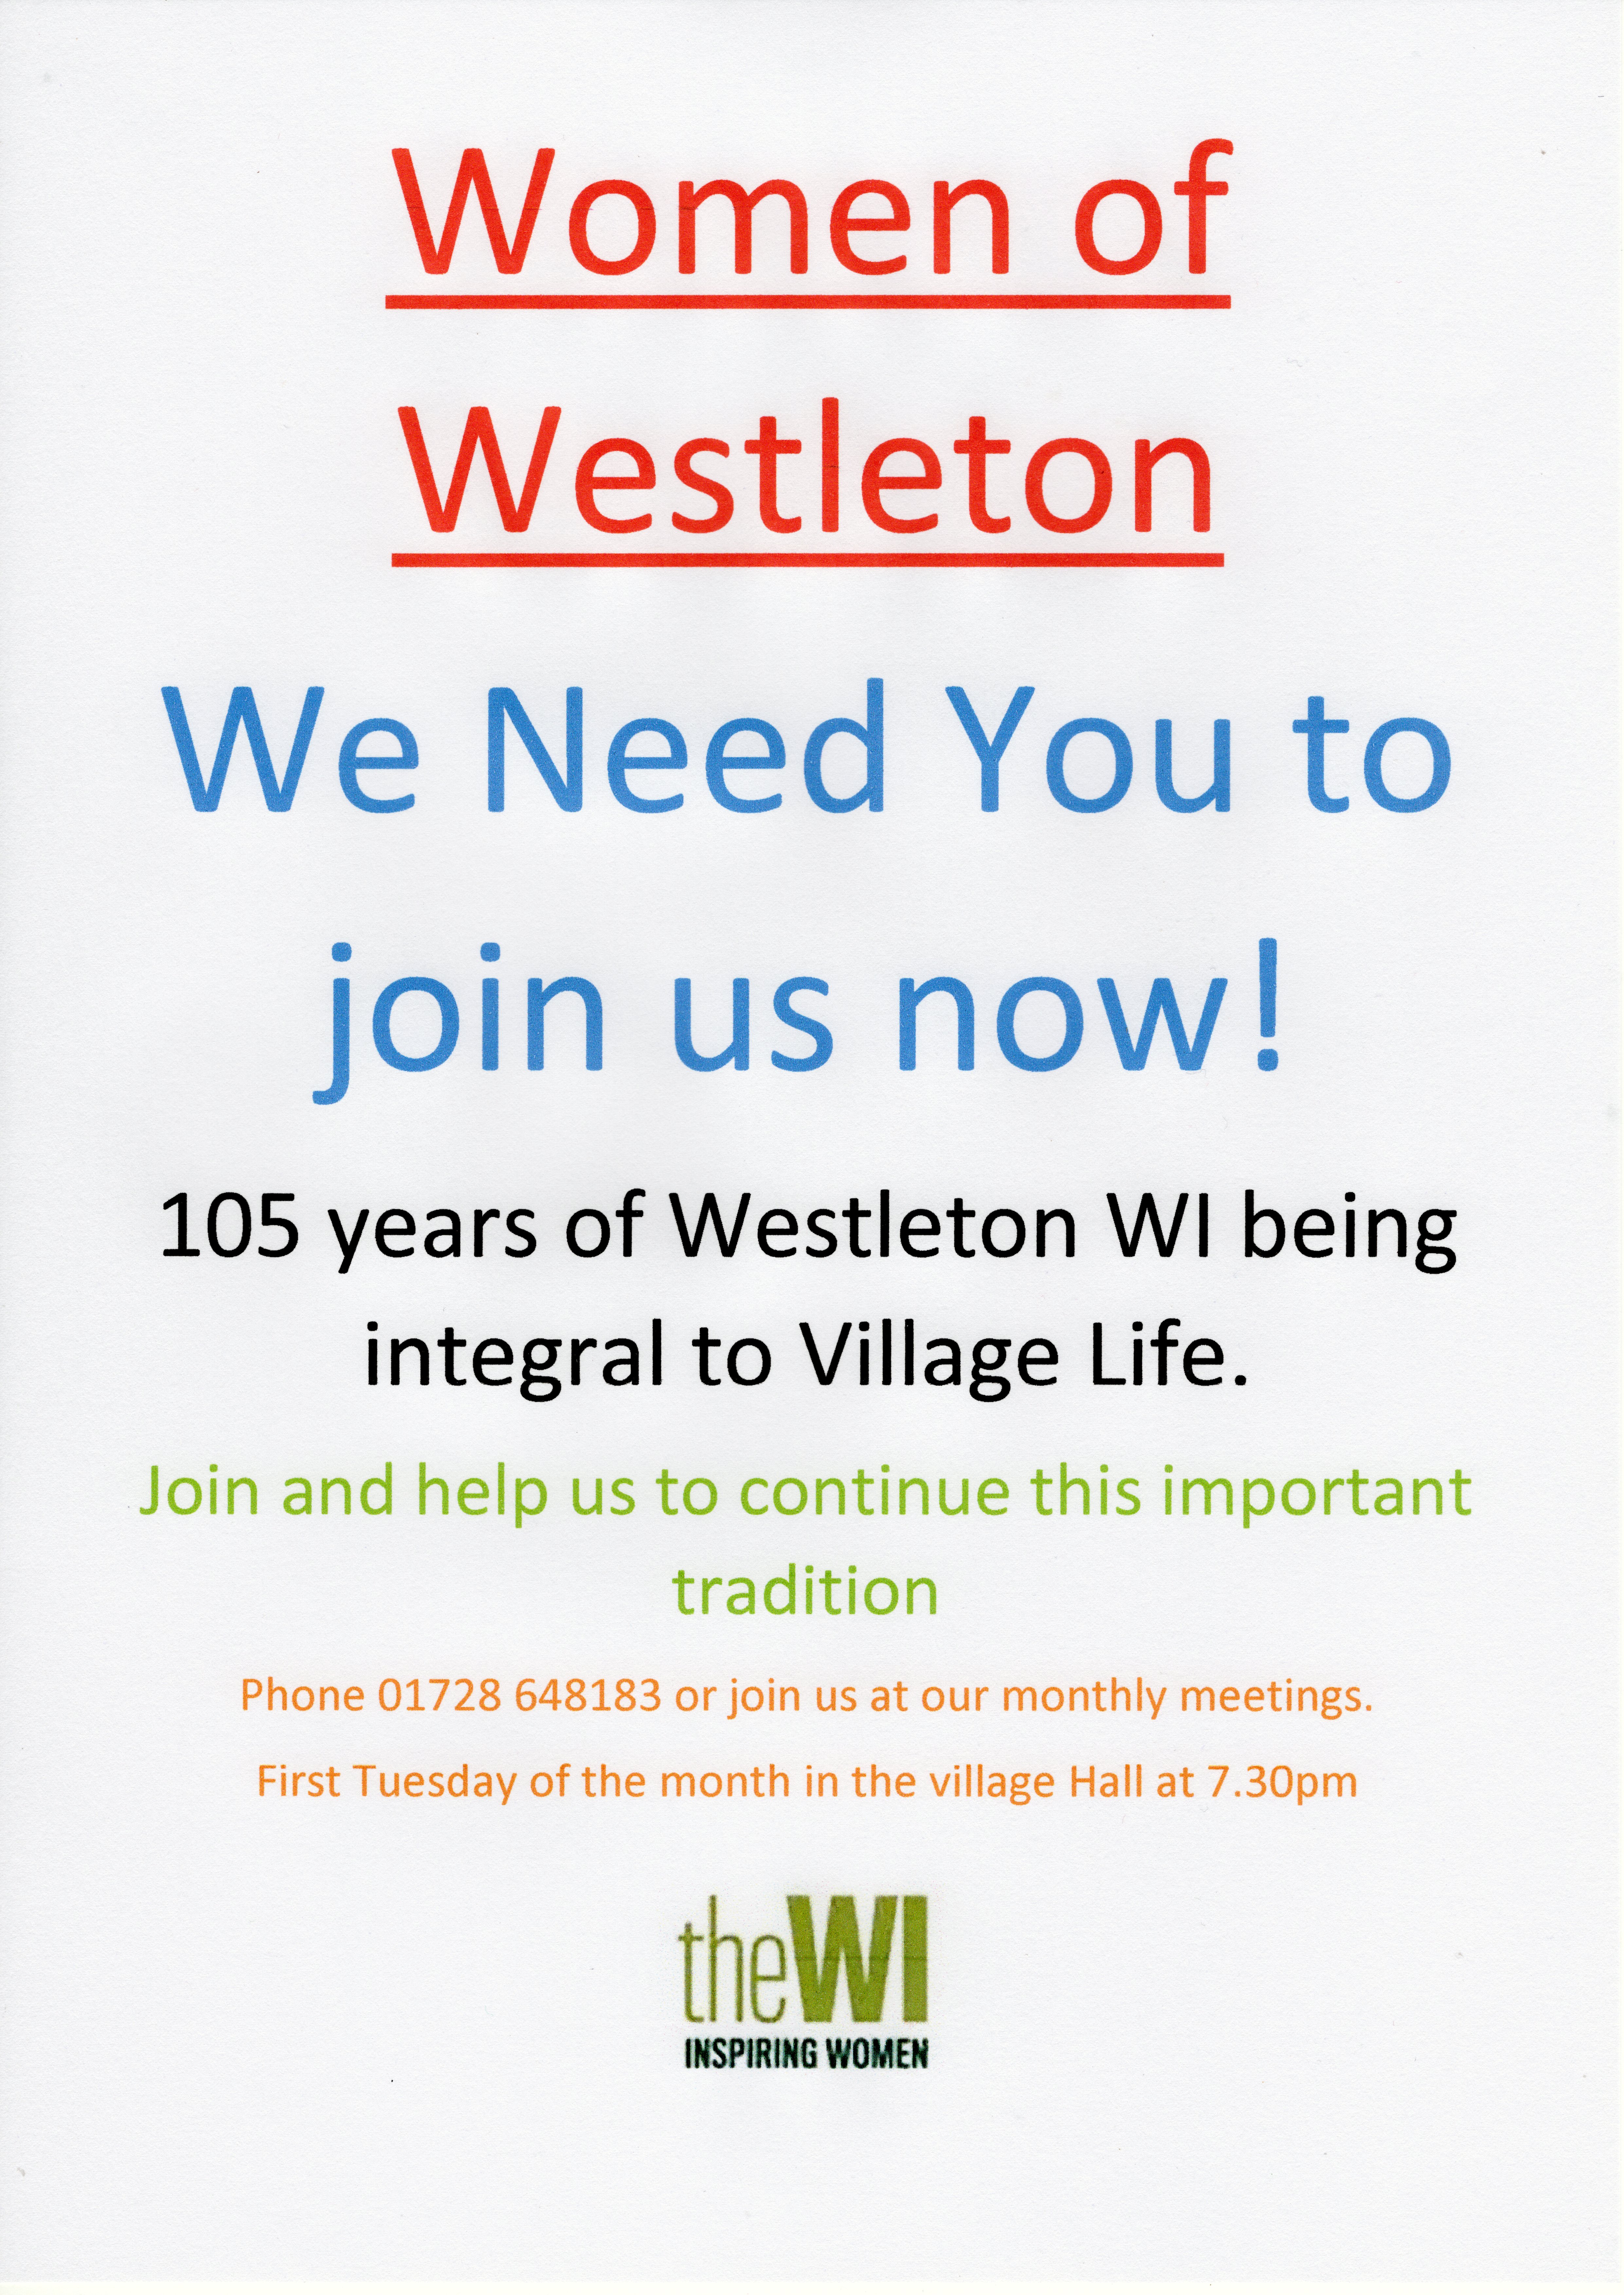 Women of Westleton We Need You to join us now! 105 years of Westleton WI being integral to Village Life. Join and help us to continue this important tradition  Phone 01728 648183 or join us at our monthly meetings. First Tuesday of the month in the village Hall at 7.30pm  